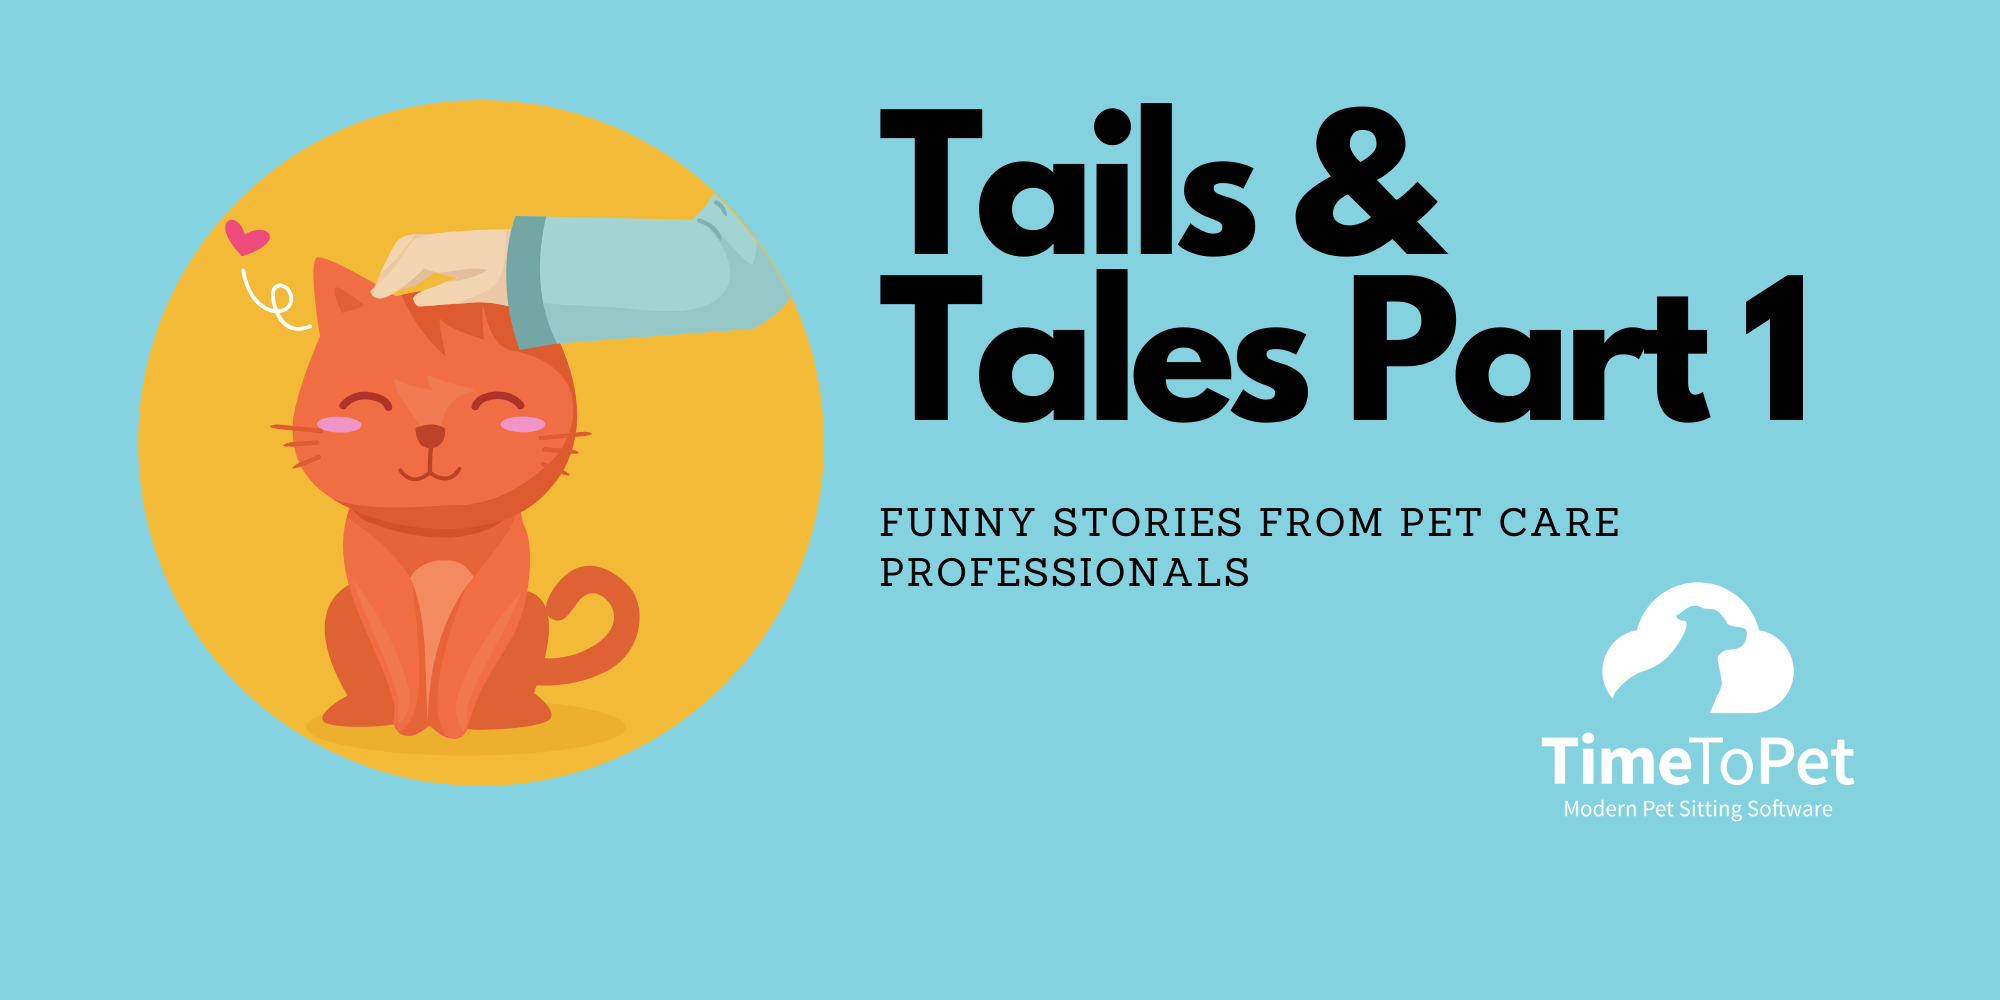 Tails and tales summary image with cat and logo